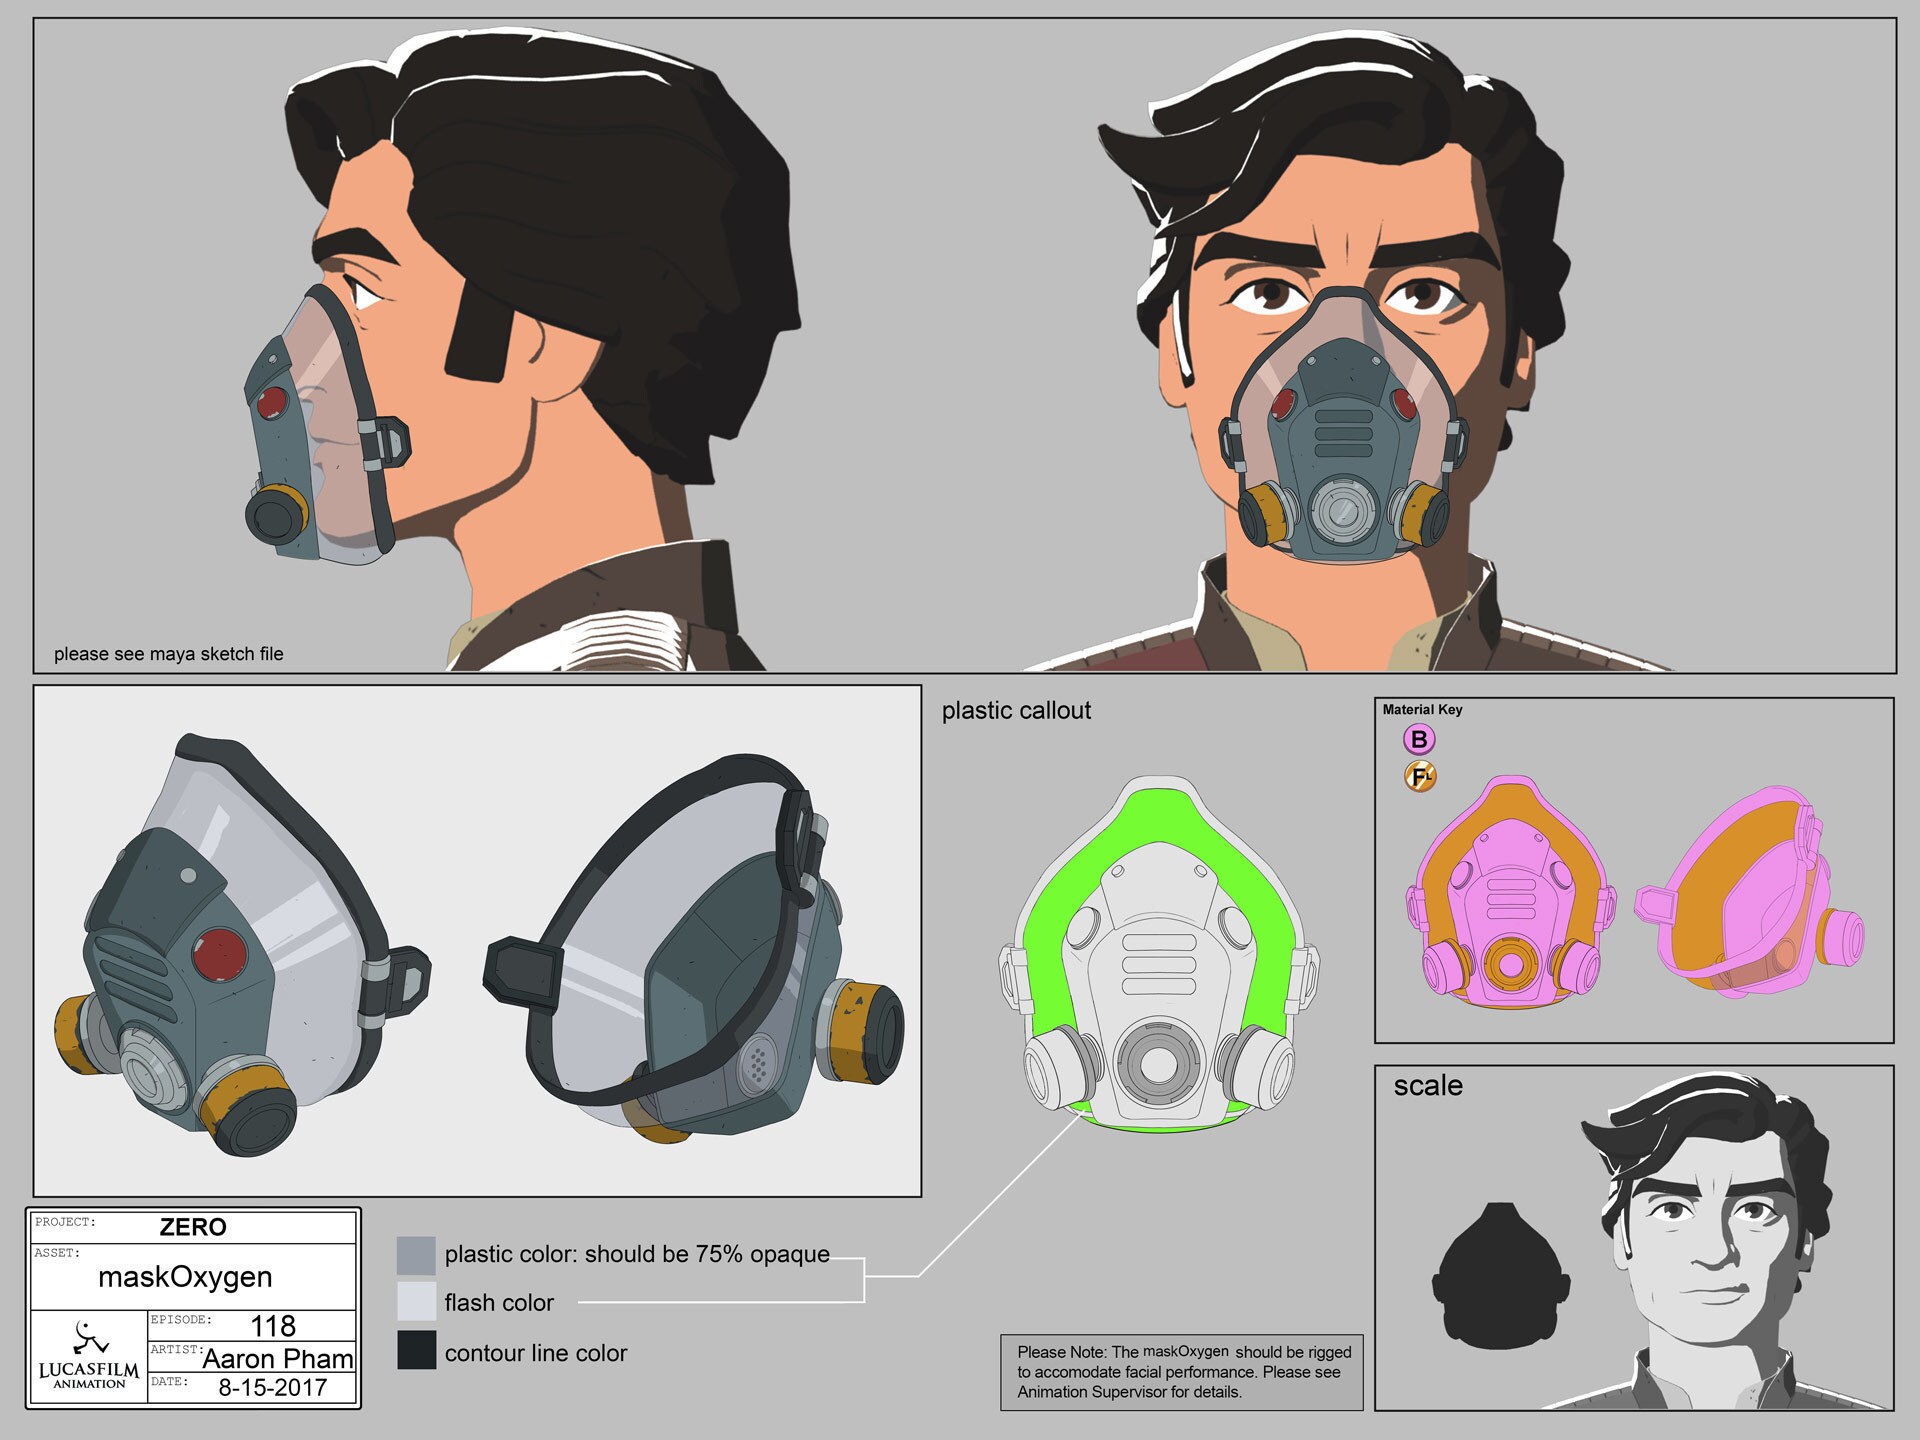 Poe with oxygen mask by Aaron Pham.